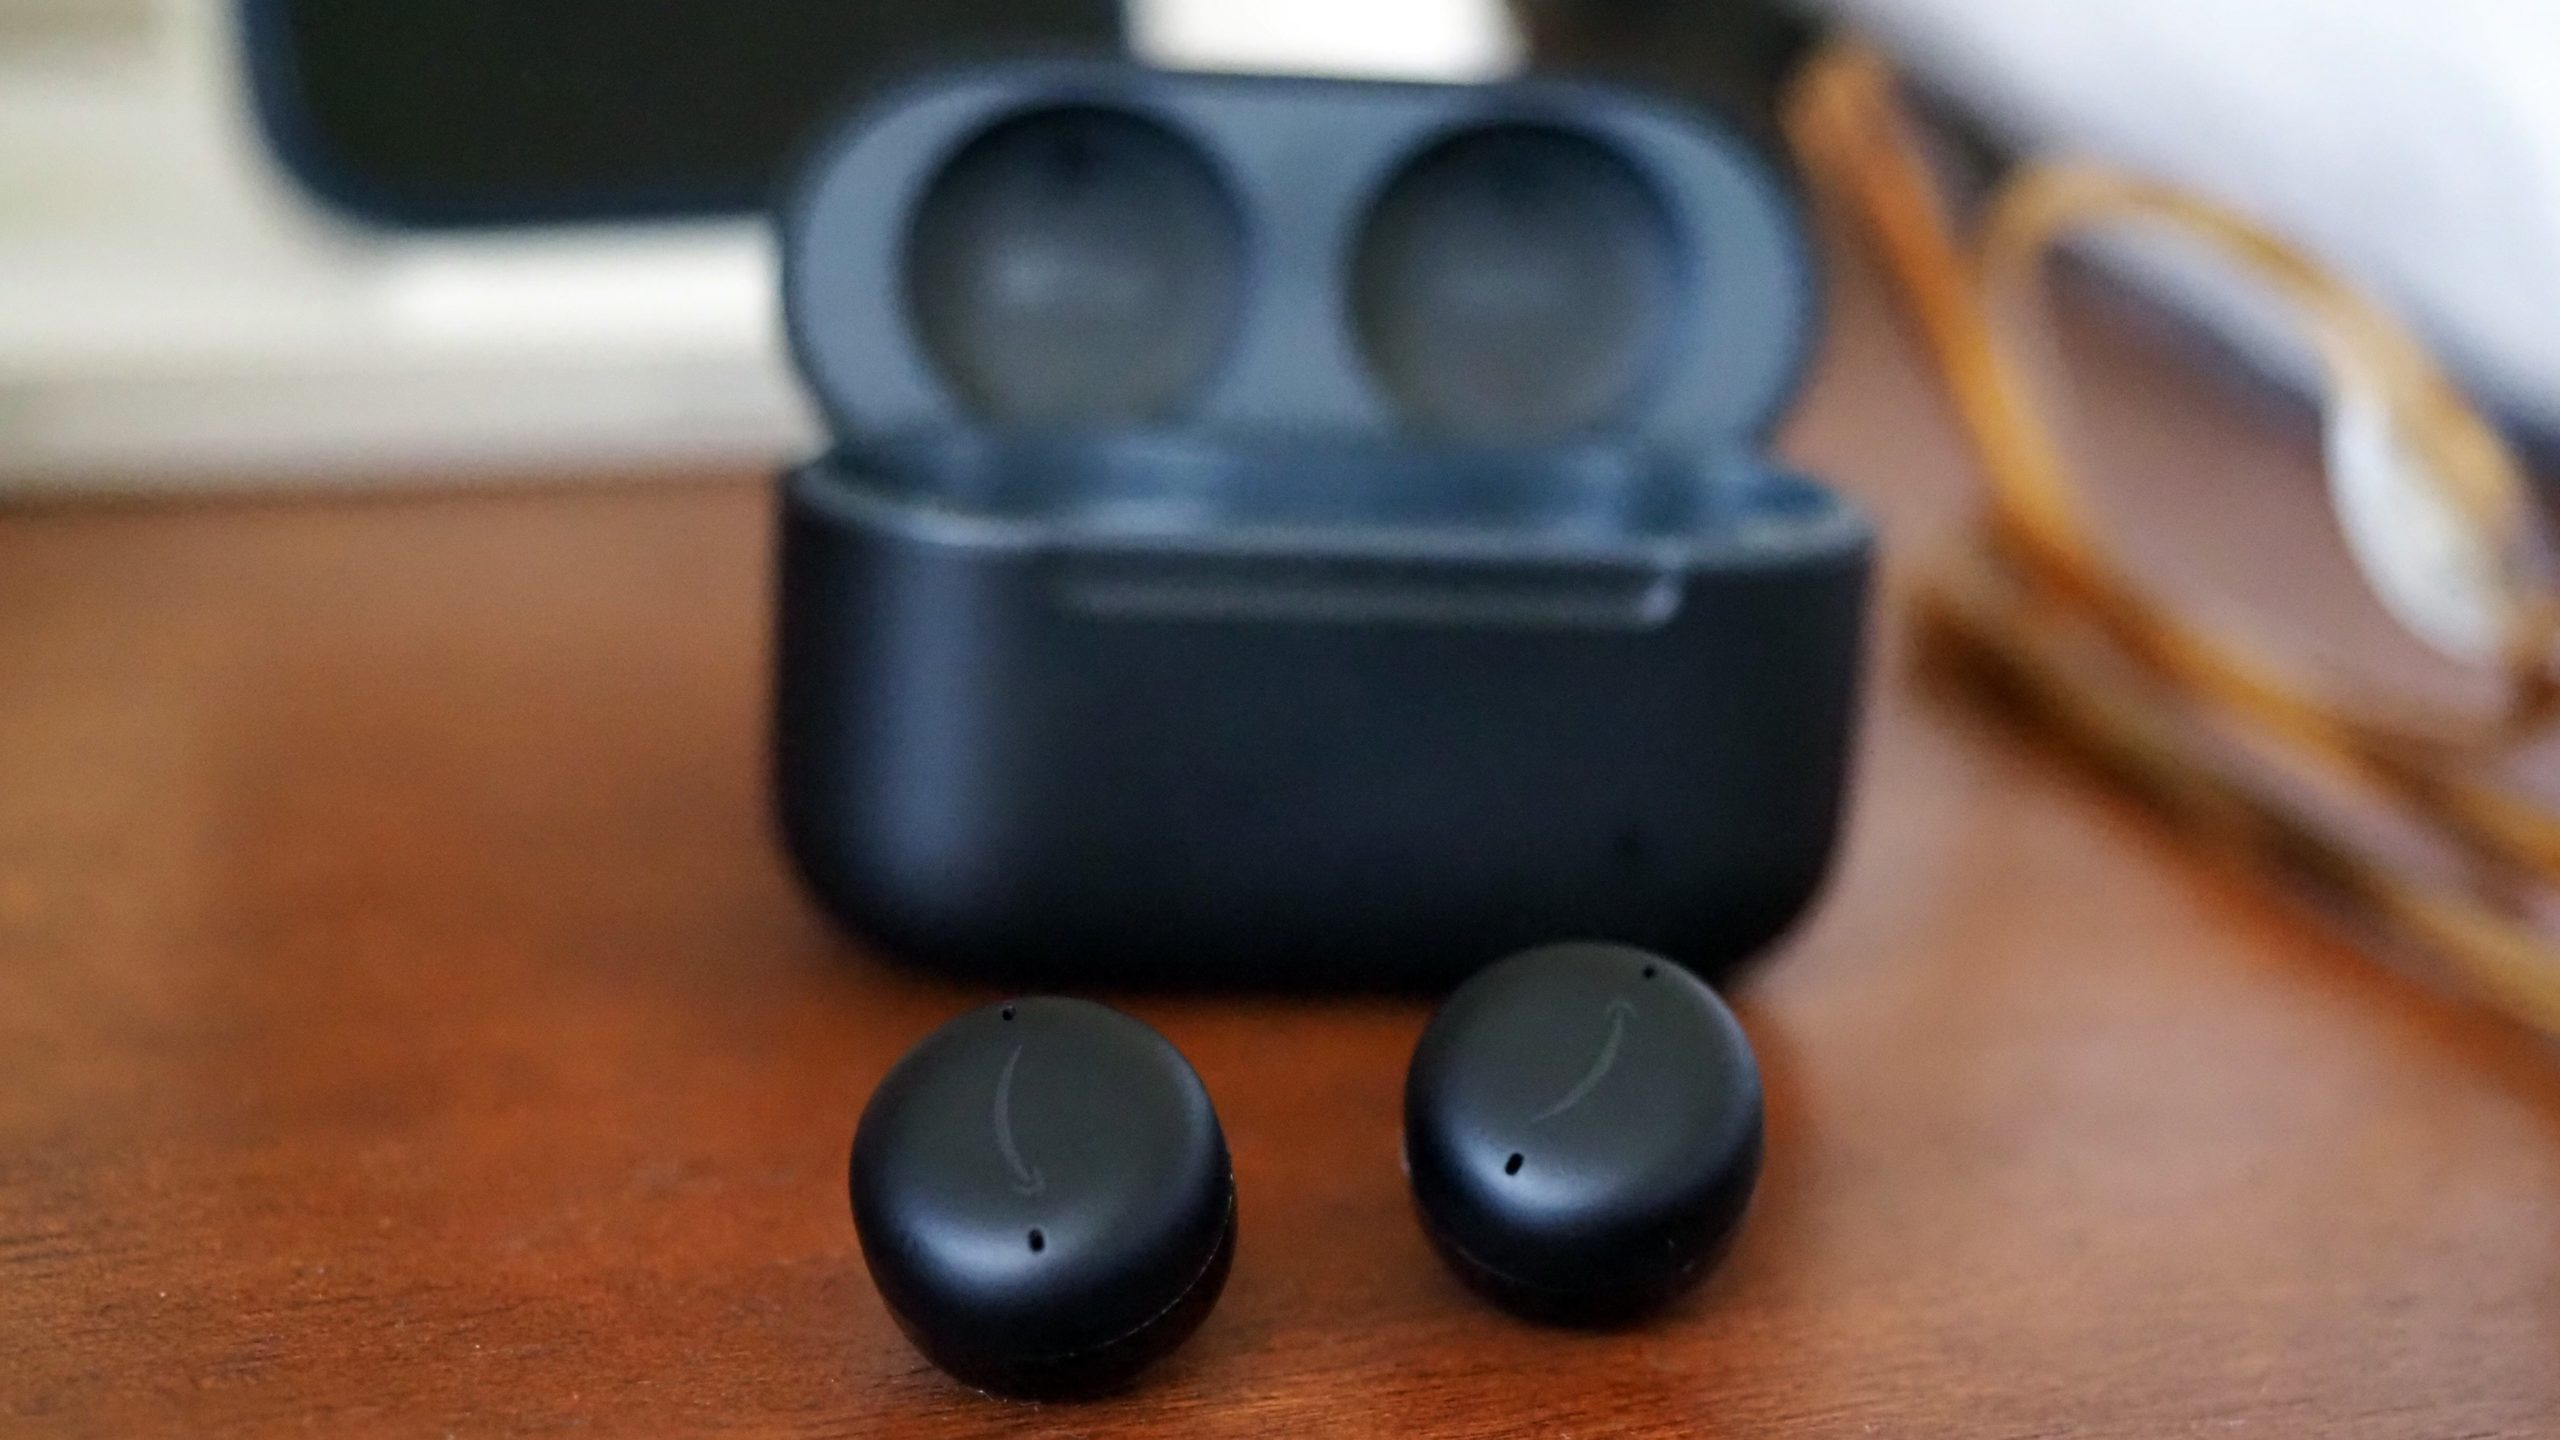 I don't usually lose my earbud case like this. (Photo: Caitlin McGarry/Gizmodo)